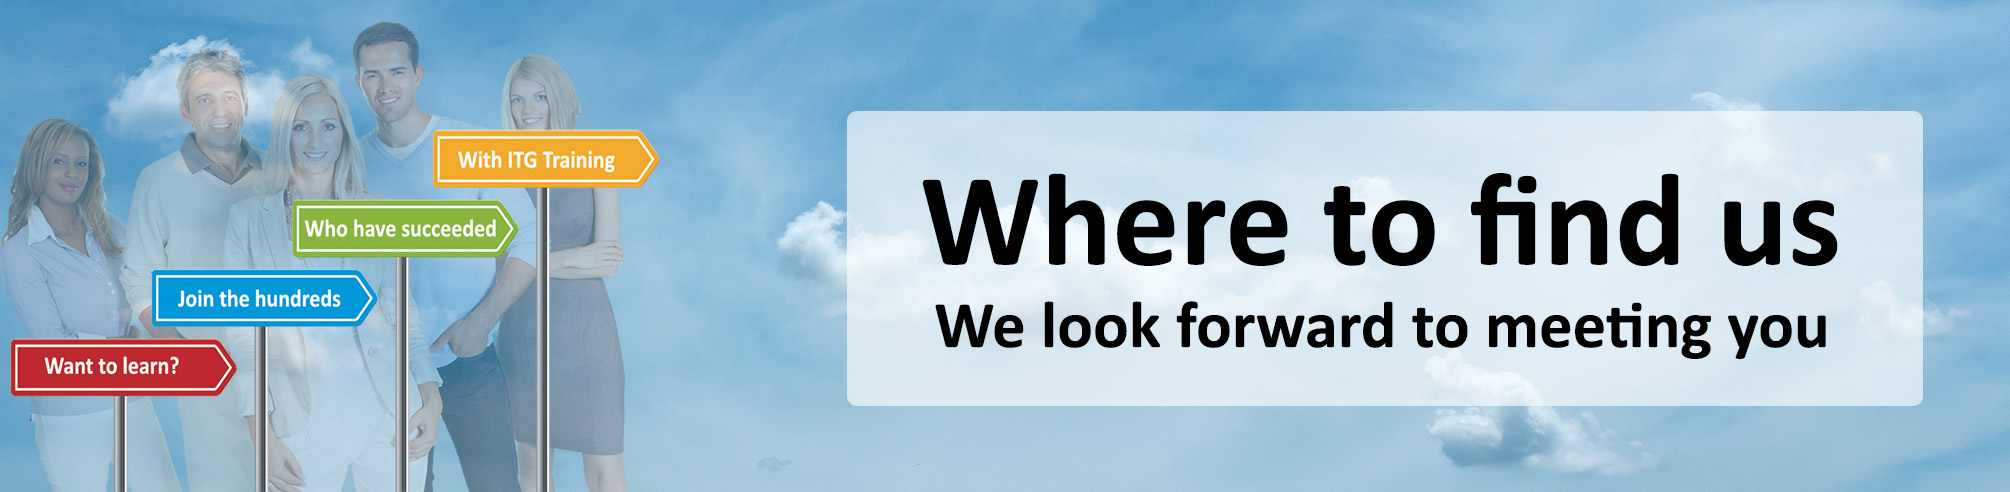 where to find us banner